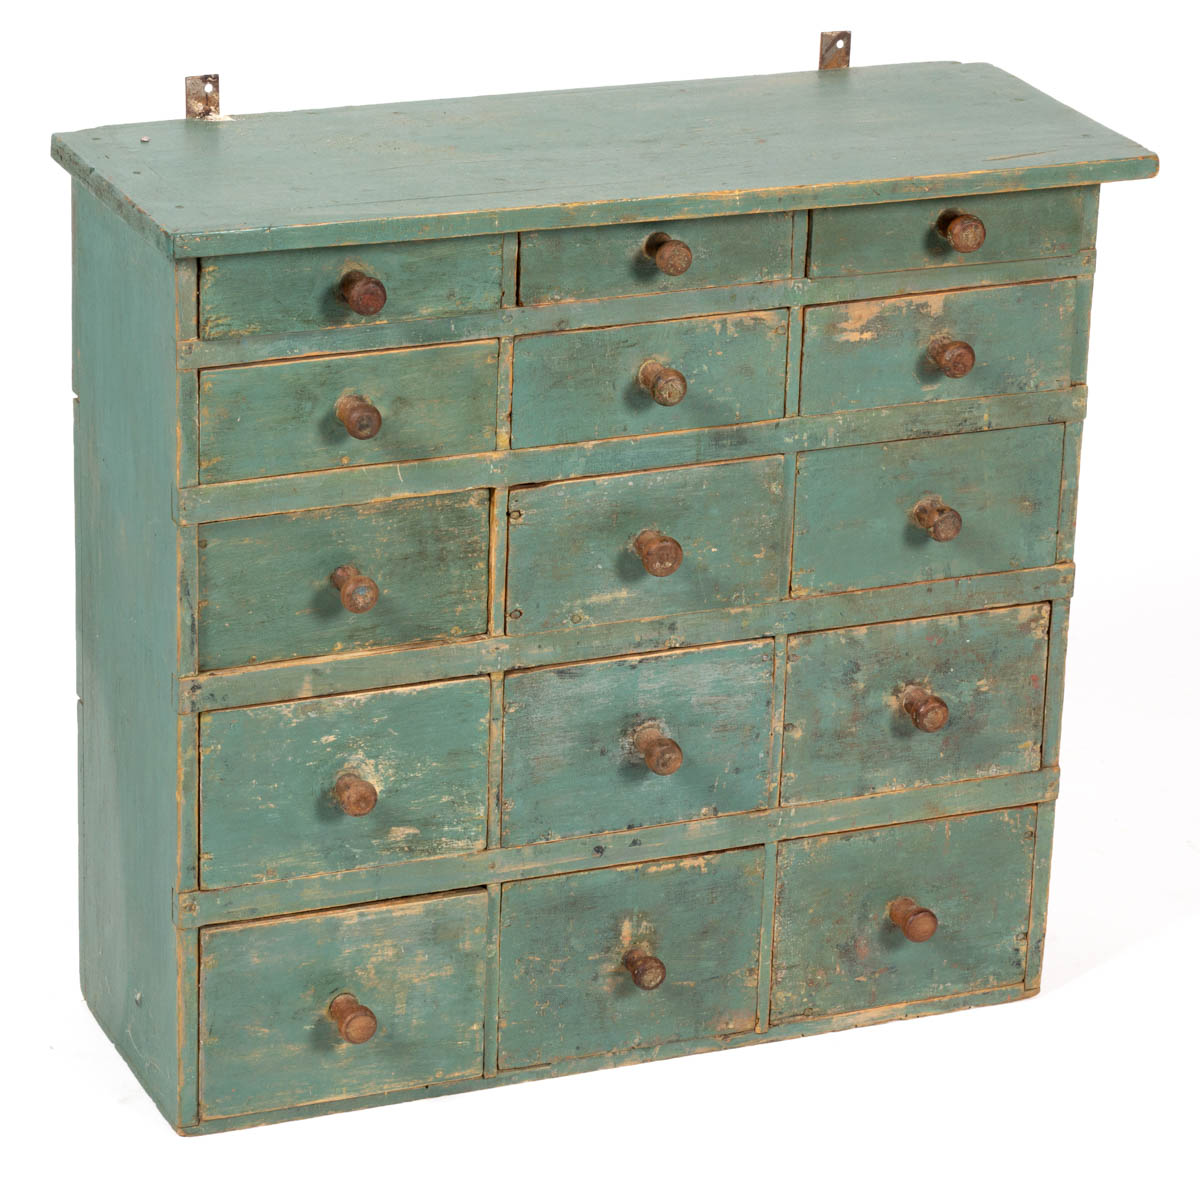 NEW ENGLAND PAINTED BASSWOOD HANGING APOTHECARY CHEST